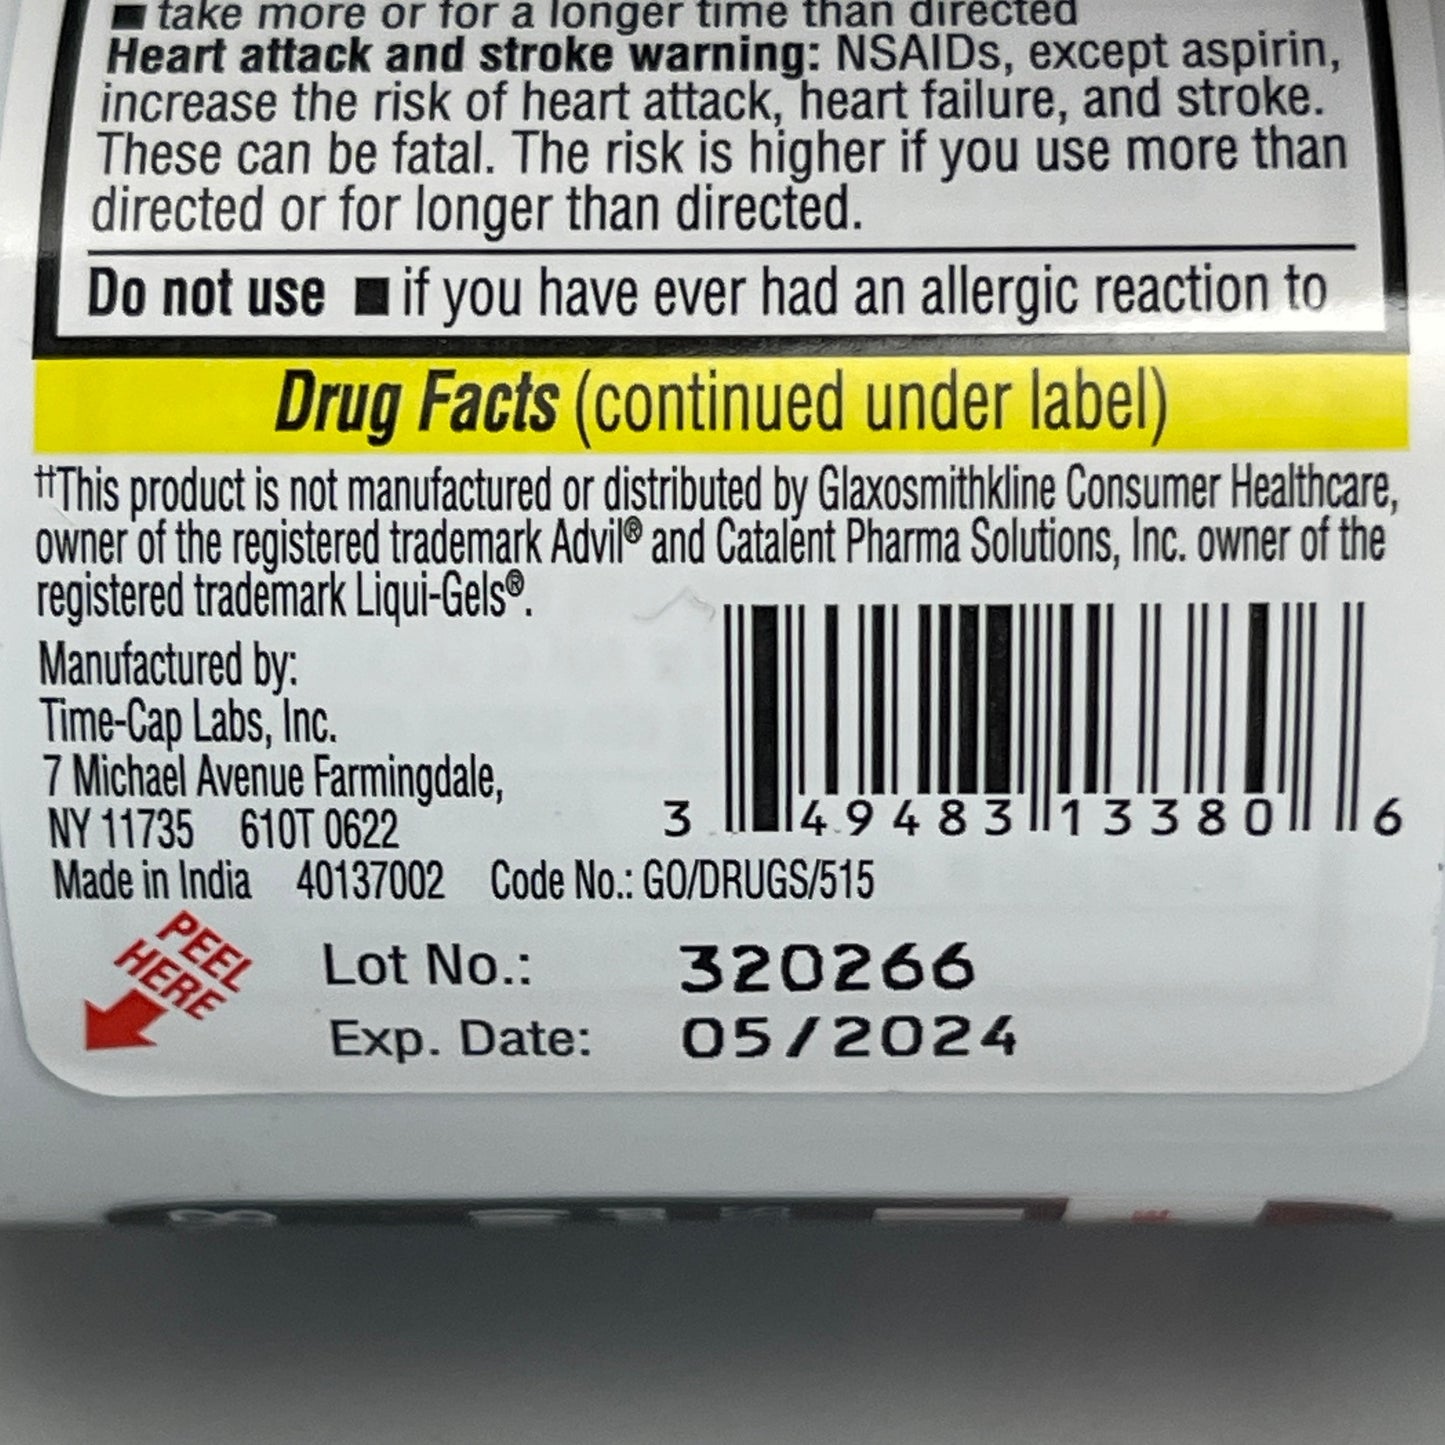 Z@ TIMELY Ibuprofen 80 Softgels 200mg Pain Reliever/Fever Reducer BB 05/24 (New) (Copy)